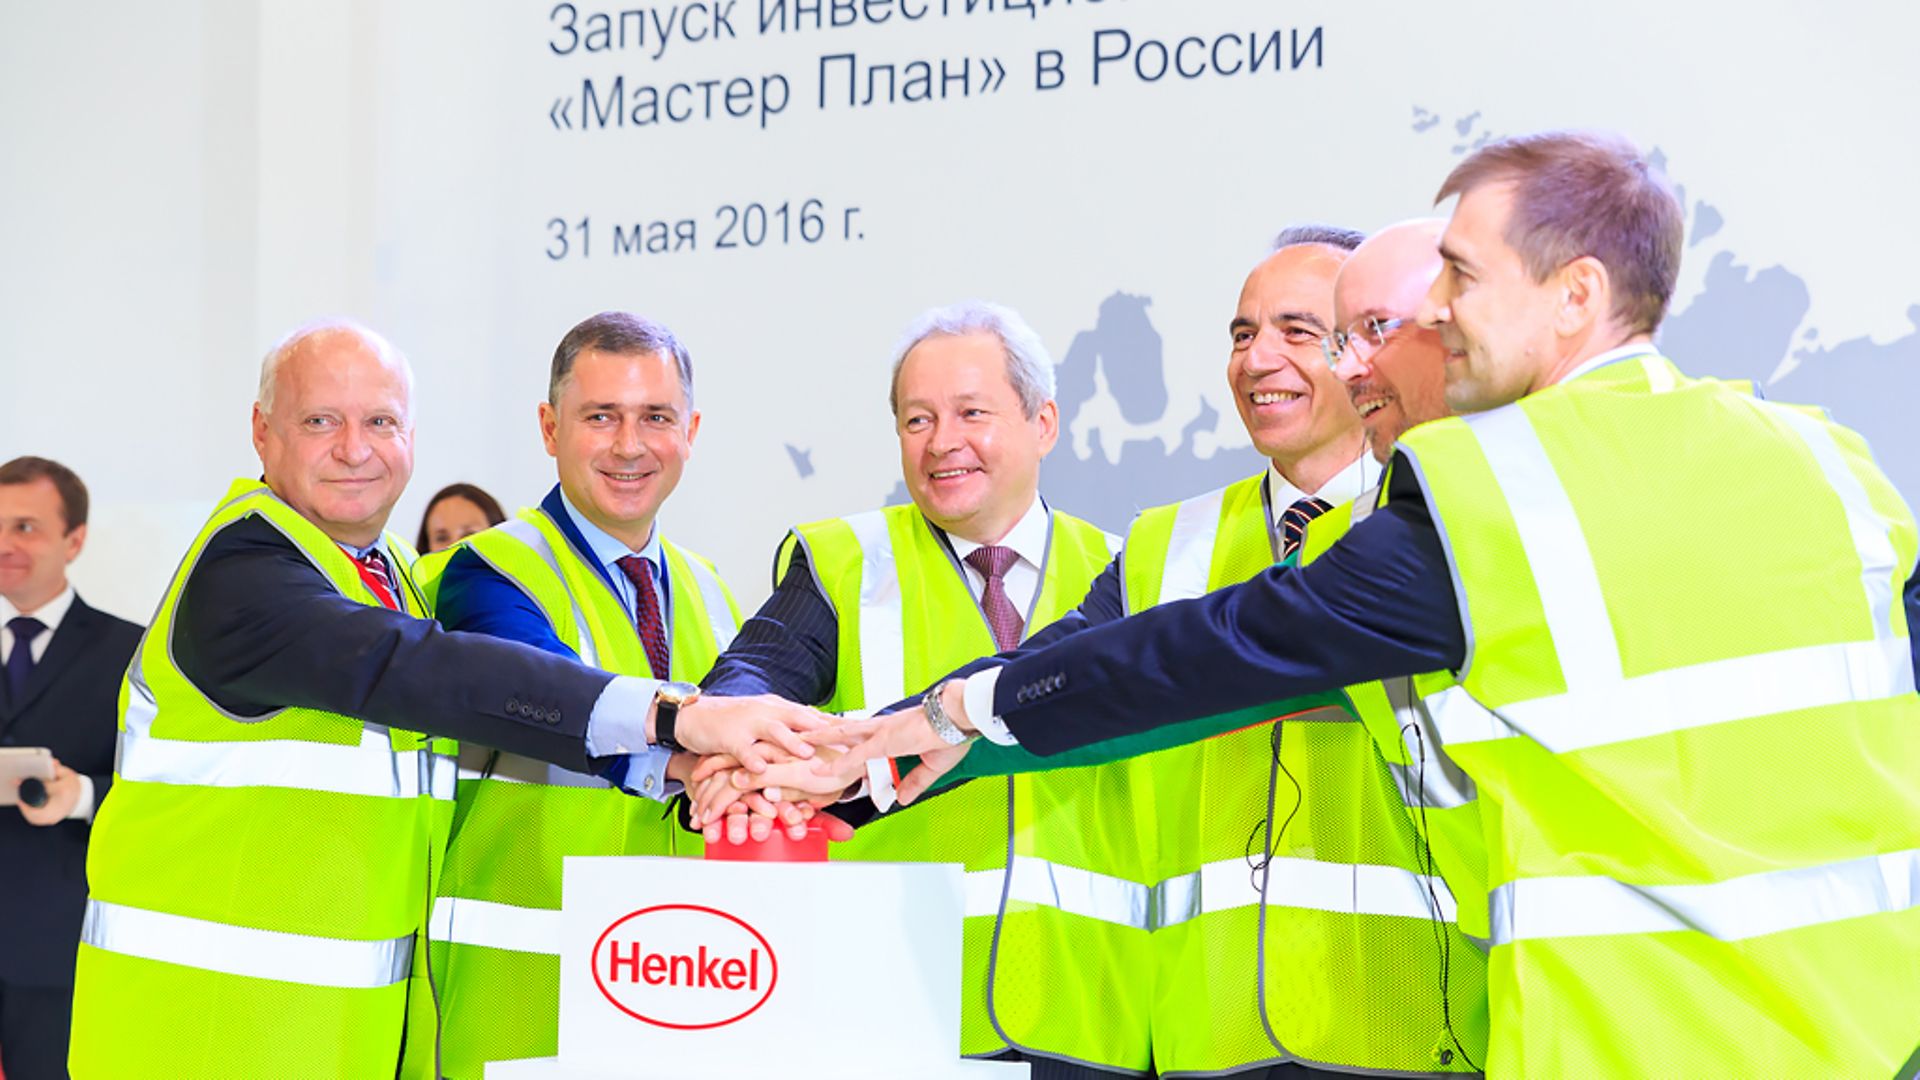 Officially inaugurated the new extended production and automated logistic center at Henkel’s plant in Perm.